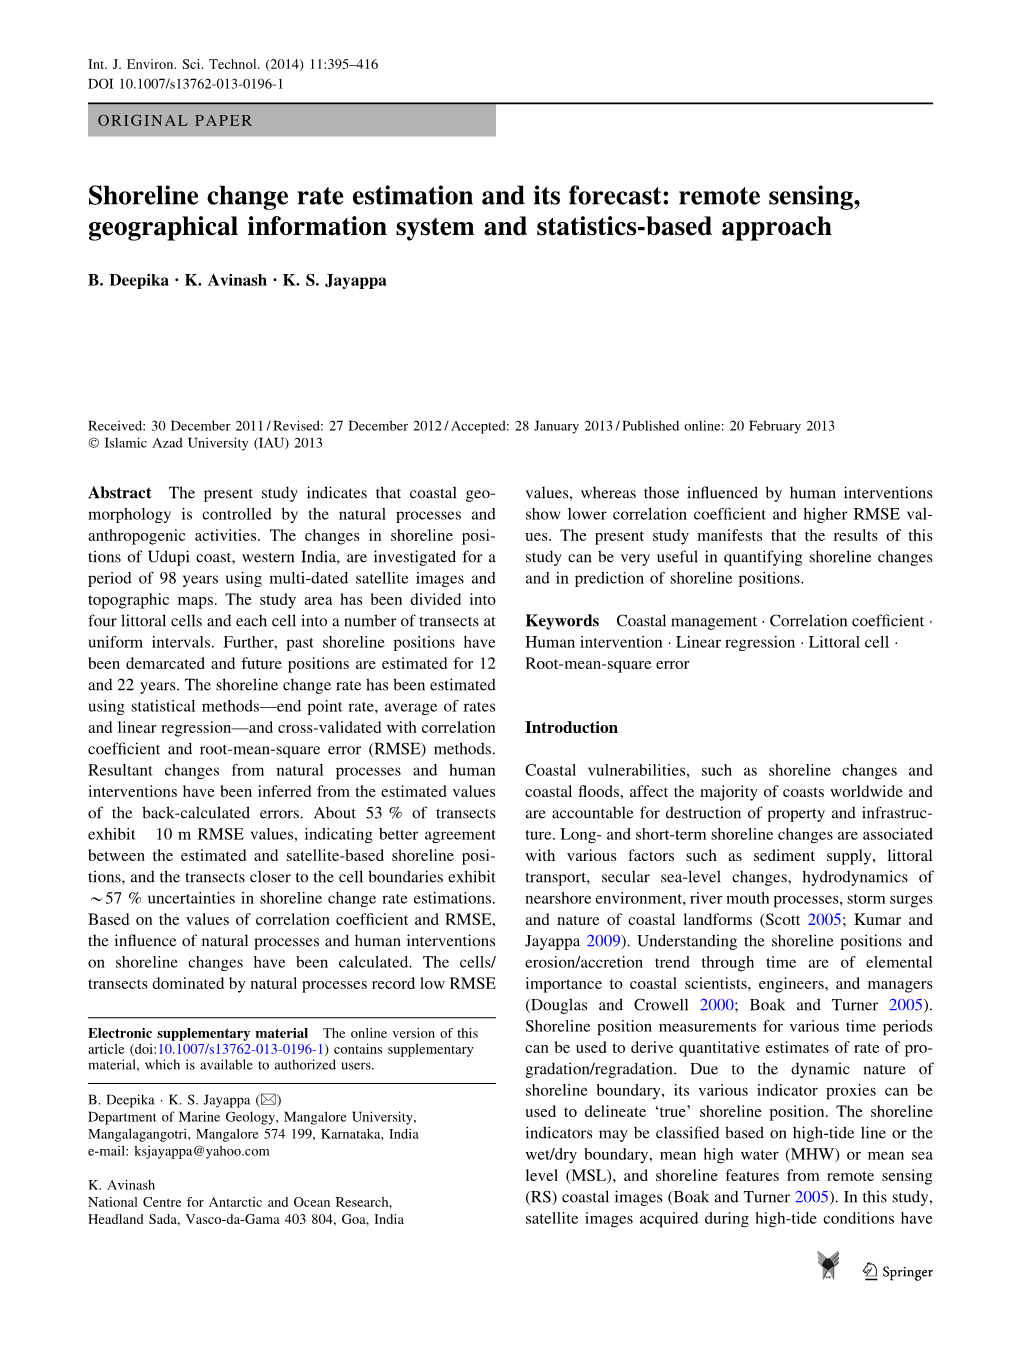 Shoreline Change Rate Estimation and Its Forecast: Remote Sensing, Geographical Information System and Statistics-Based Approach